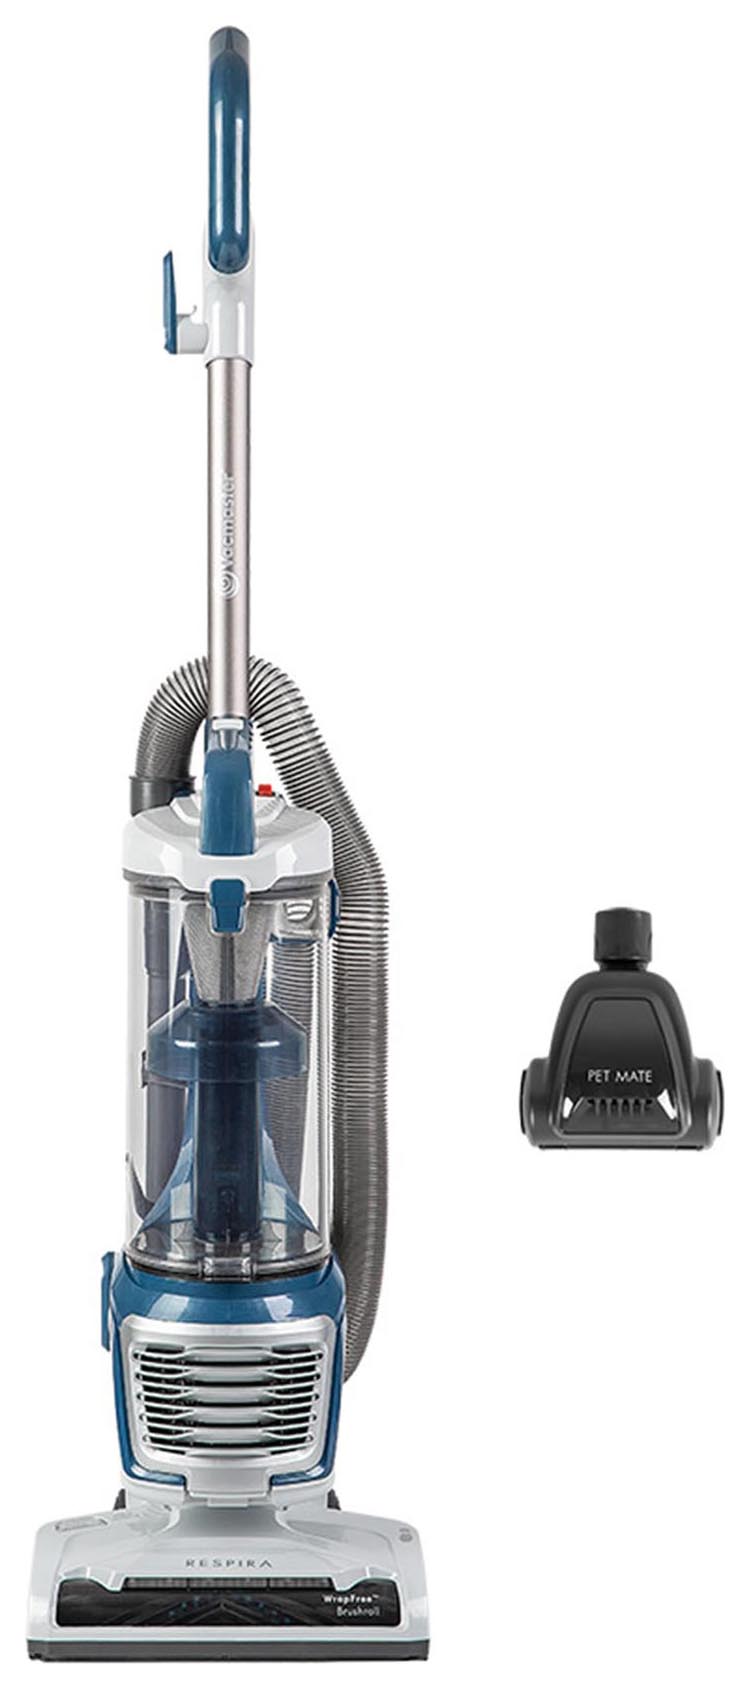 Vacmaster UC0413EUK Respira AllergenPro Bagless Upright Vacuum Cleaner with Pet Mate - 800W